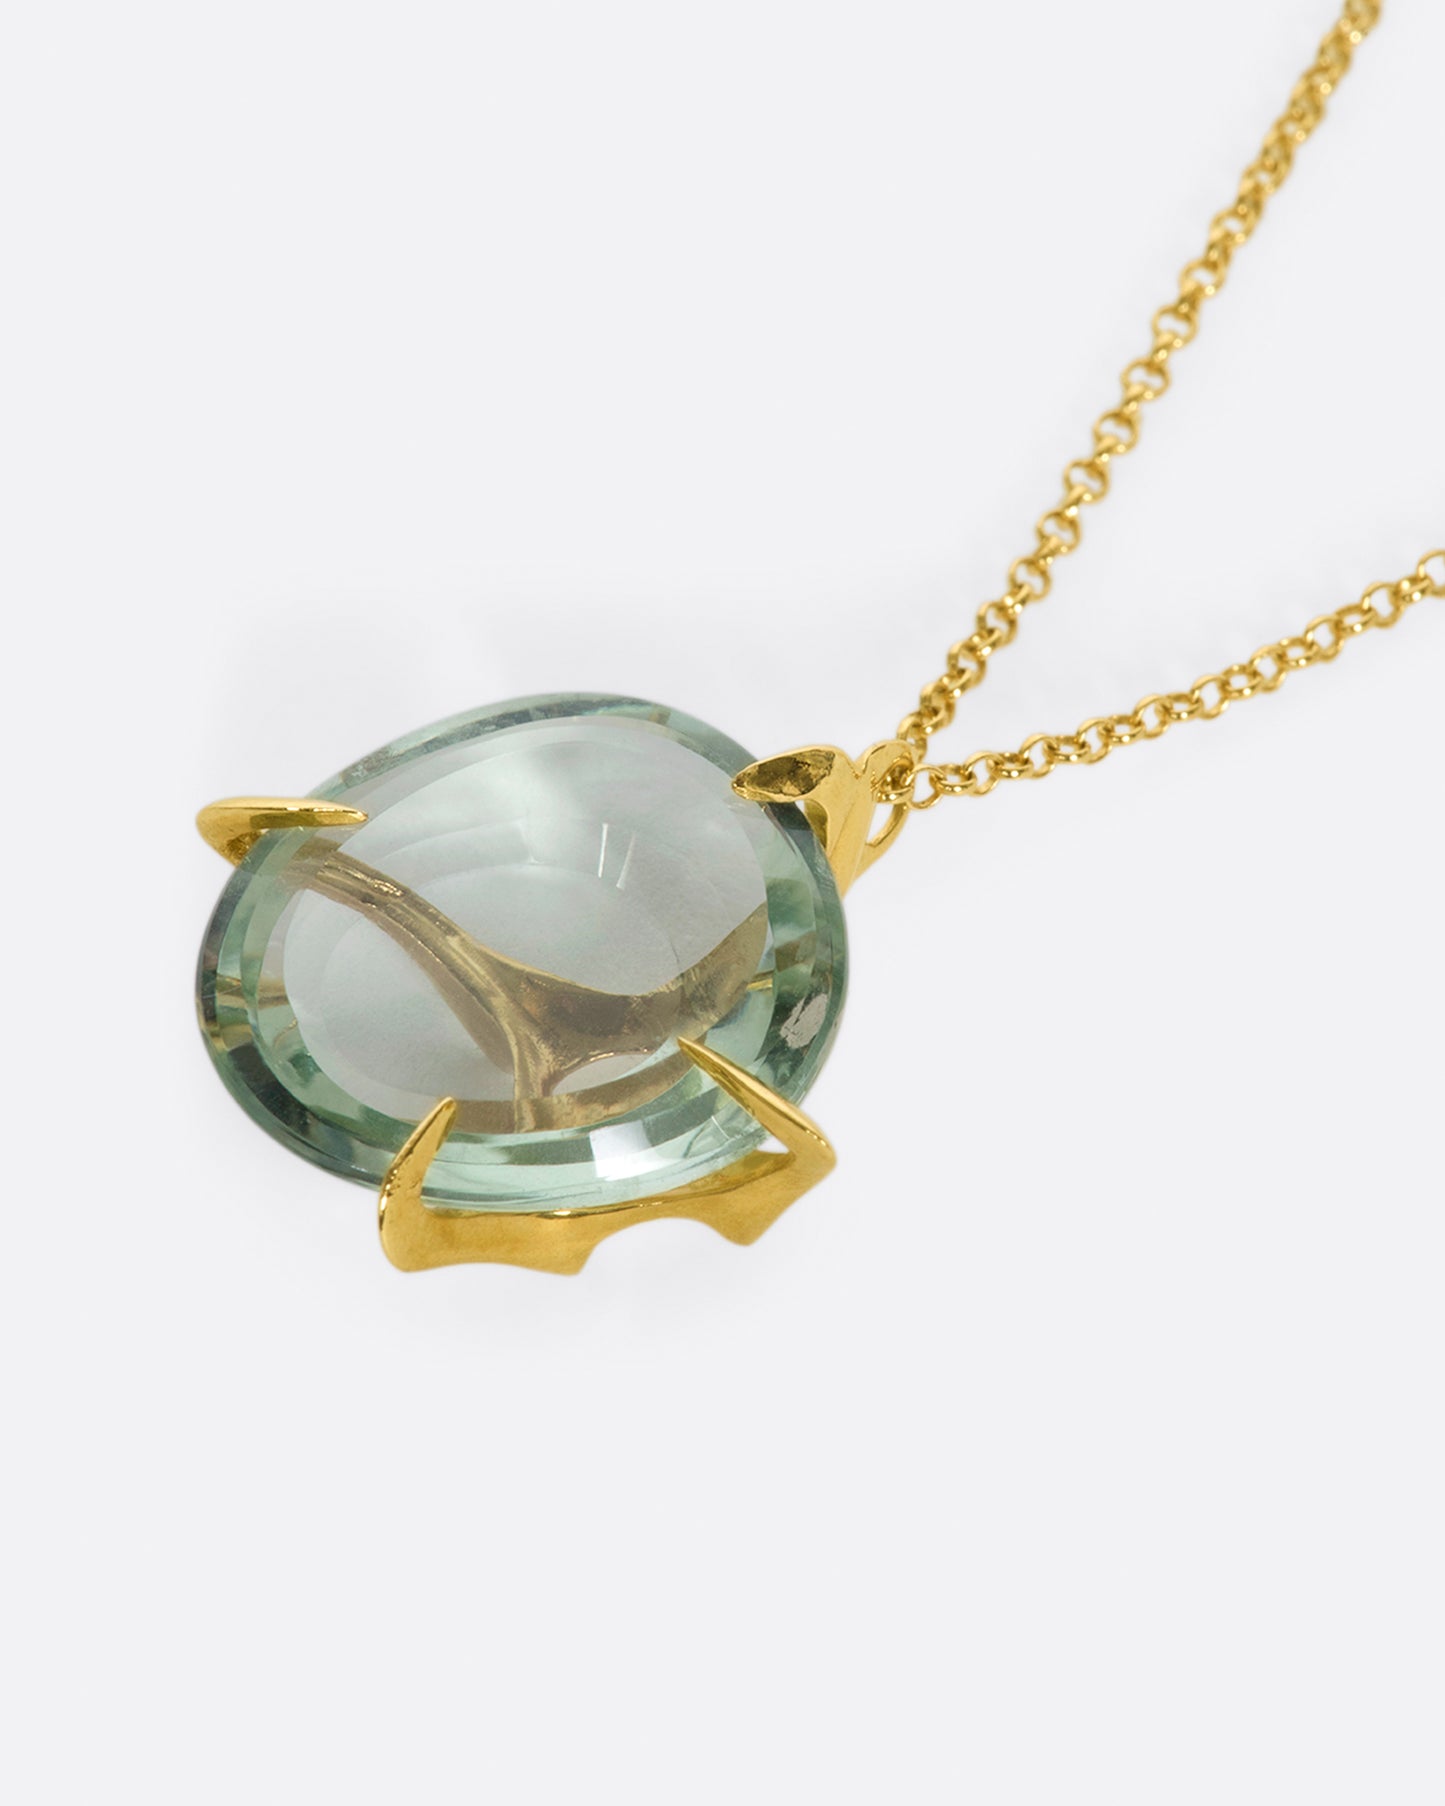 A yellow gold chain necklace with a large, round green quartz pendant set in large gold prongs.